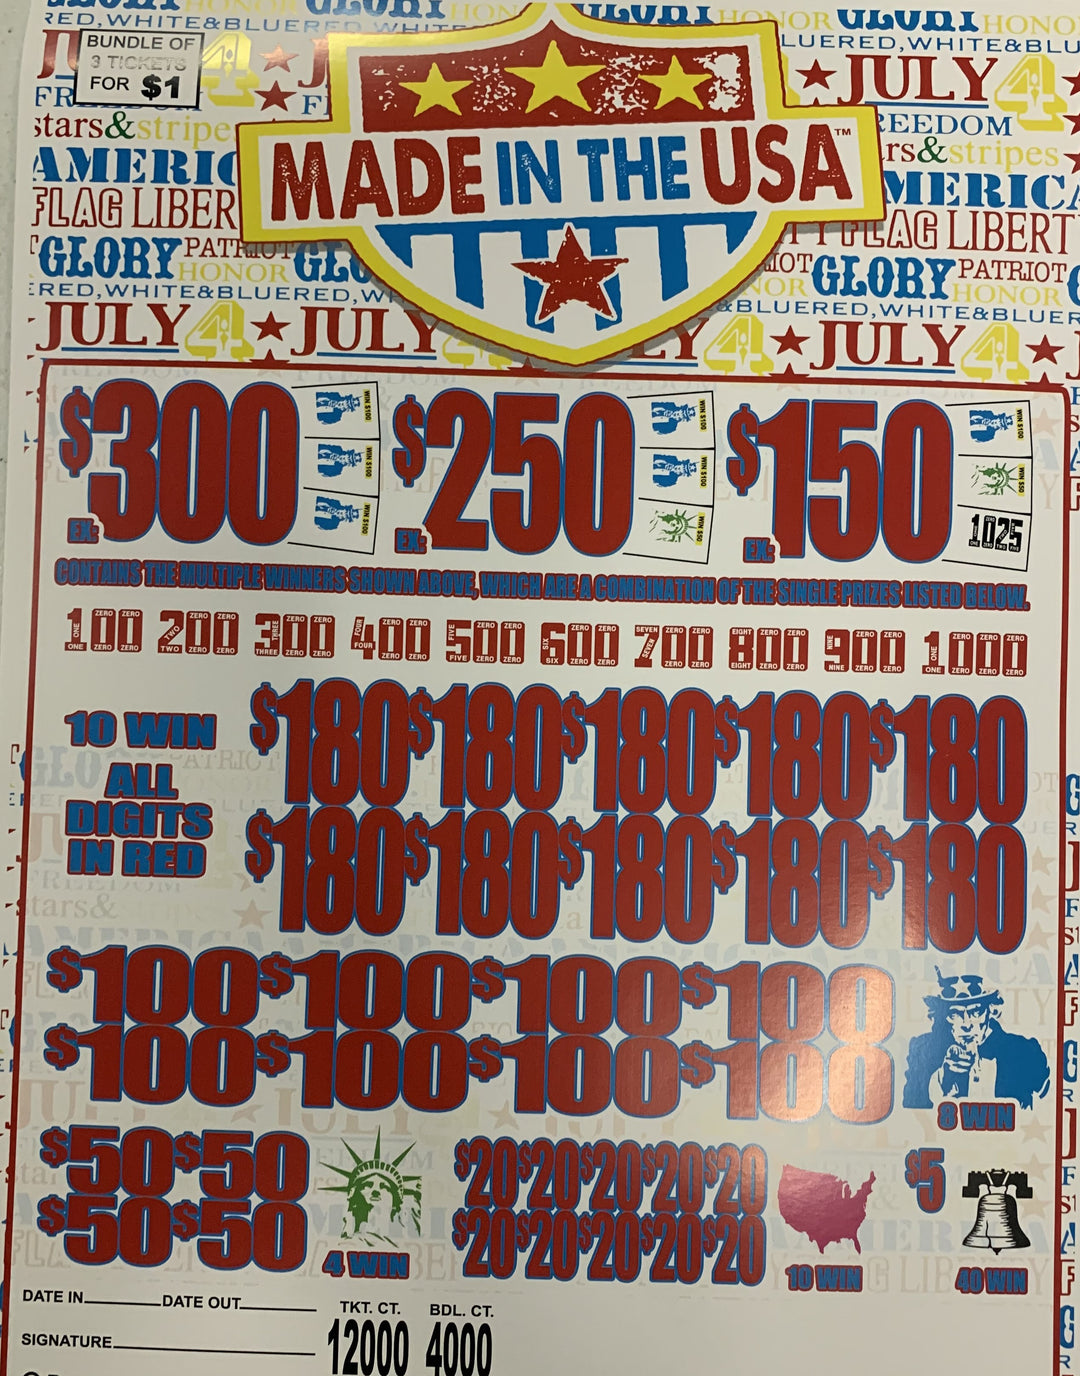 Made in the USA JAR TICKET GAME